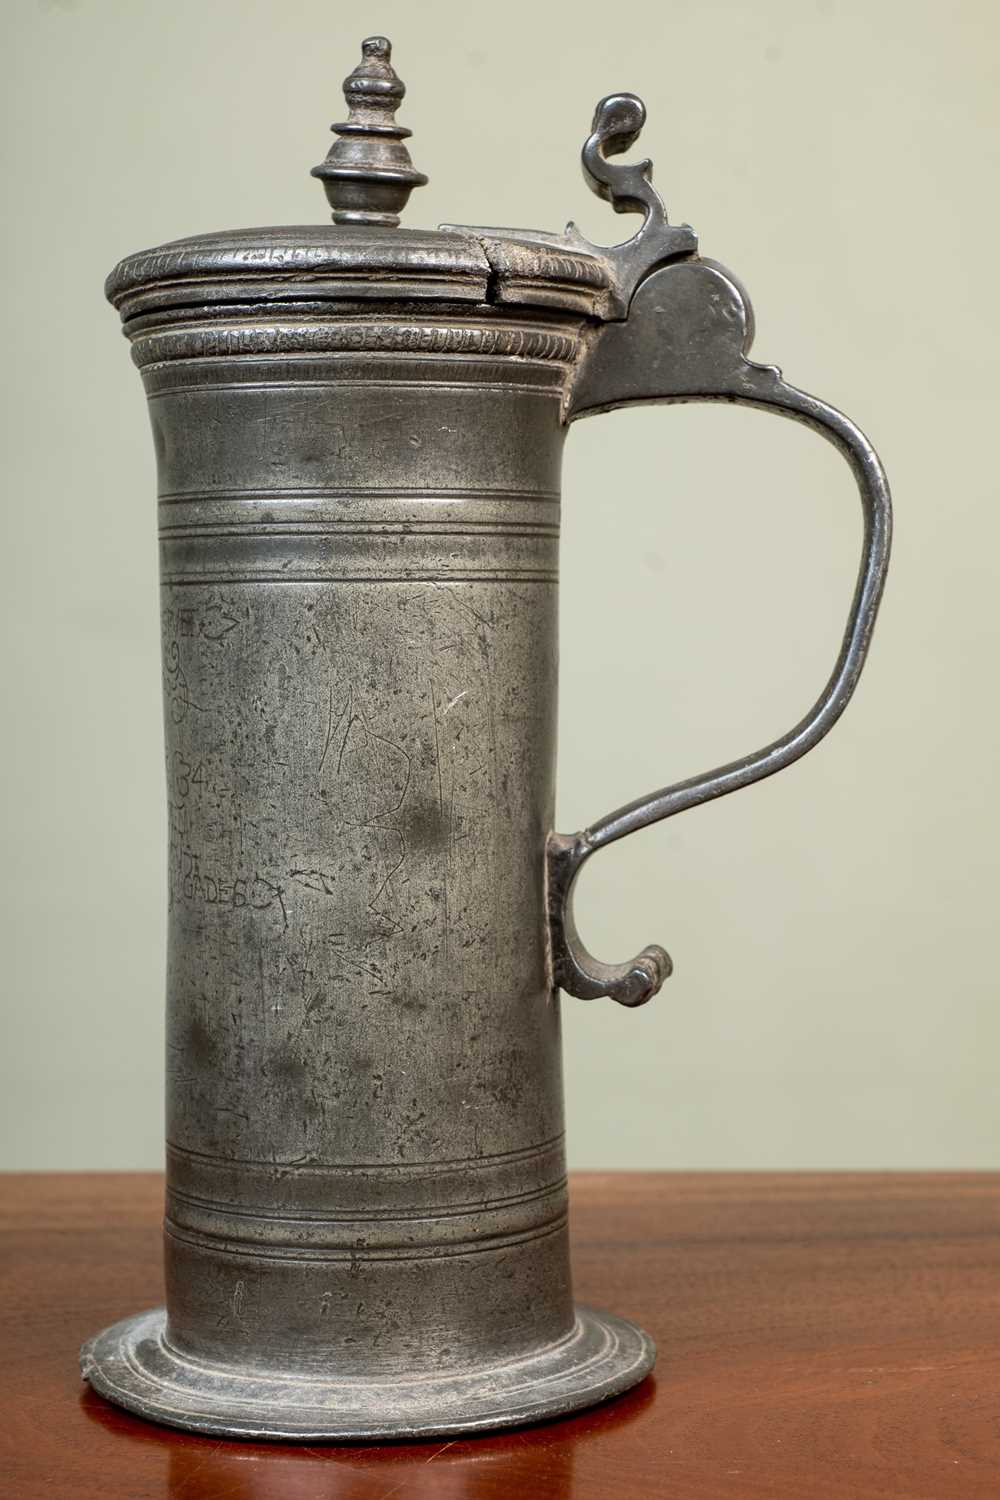 An antique continental pewter lidded tankard, possibly 18th Century Dutch, with crest and